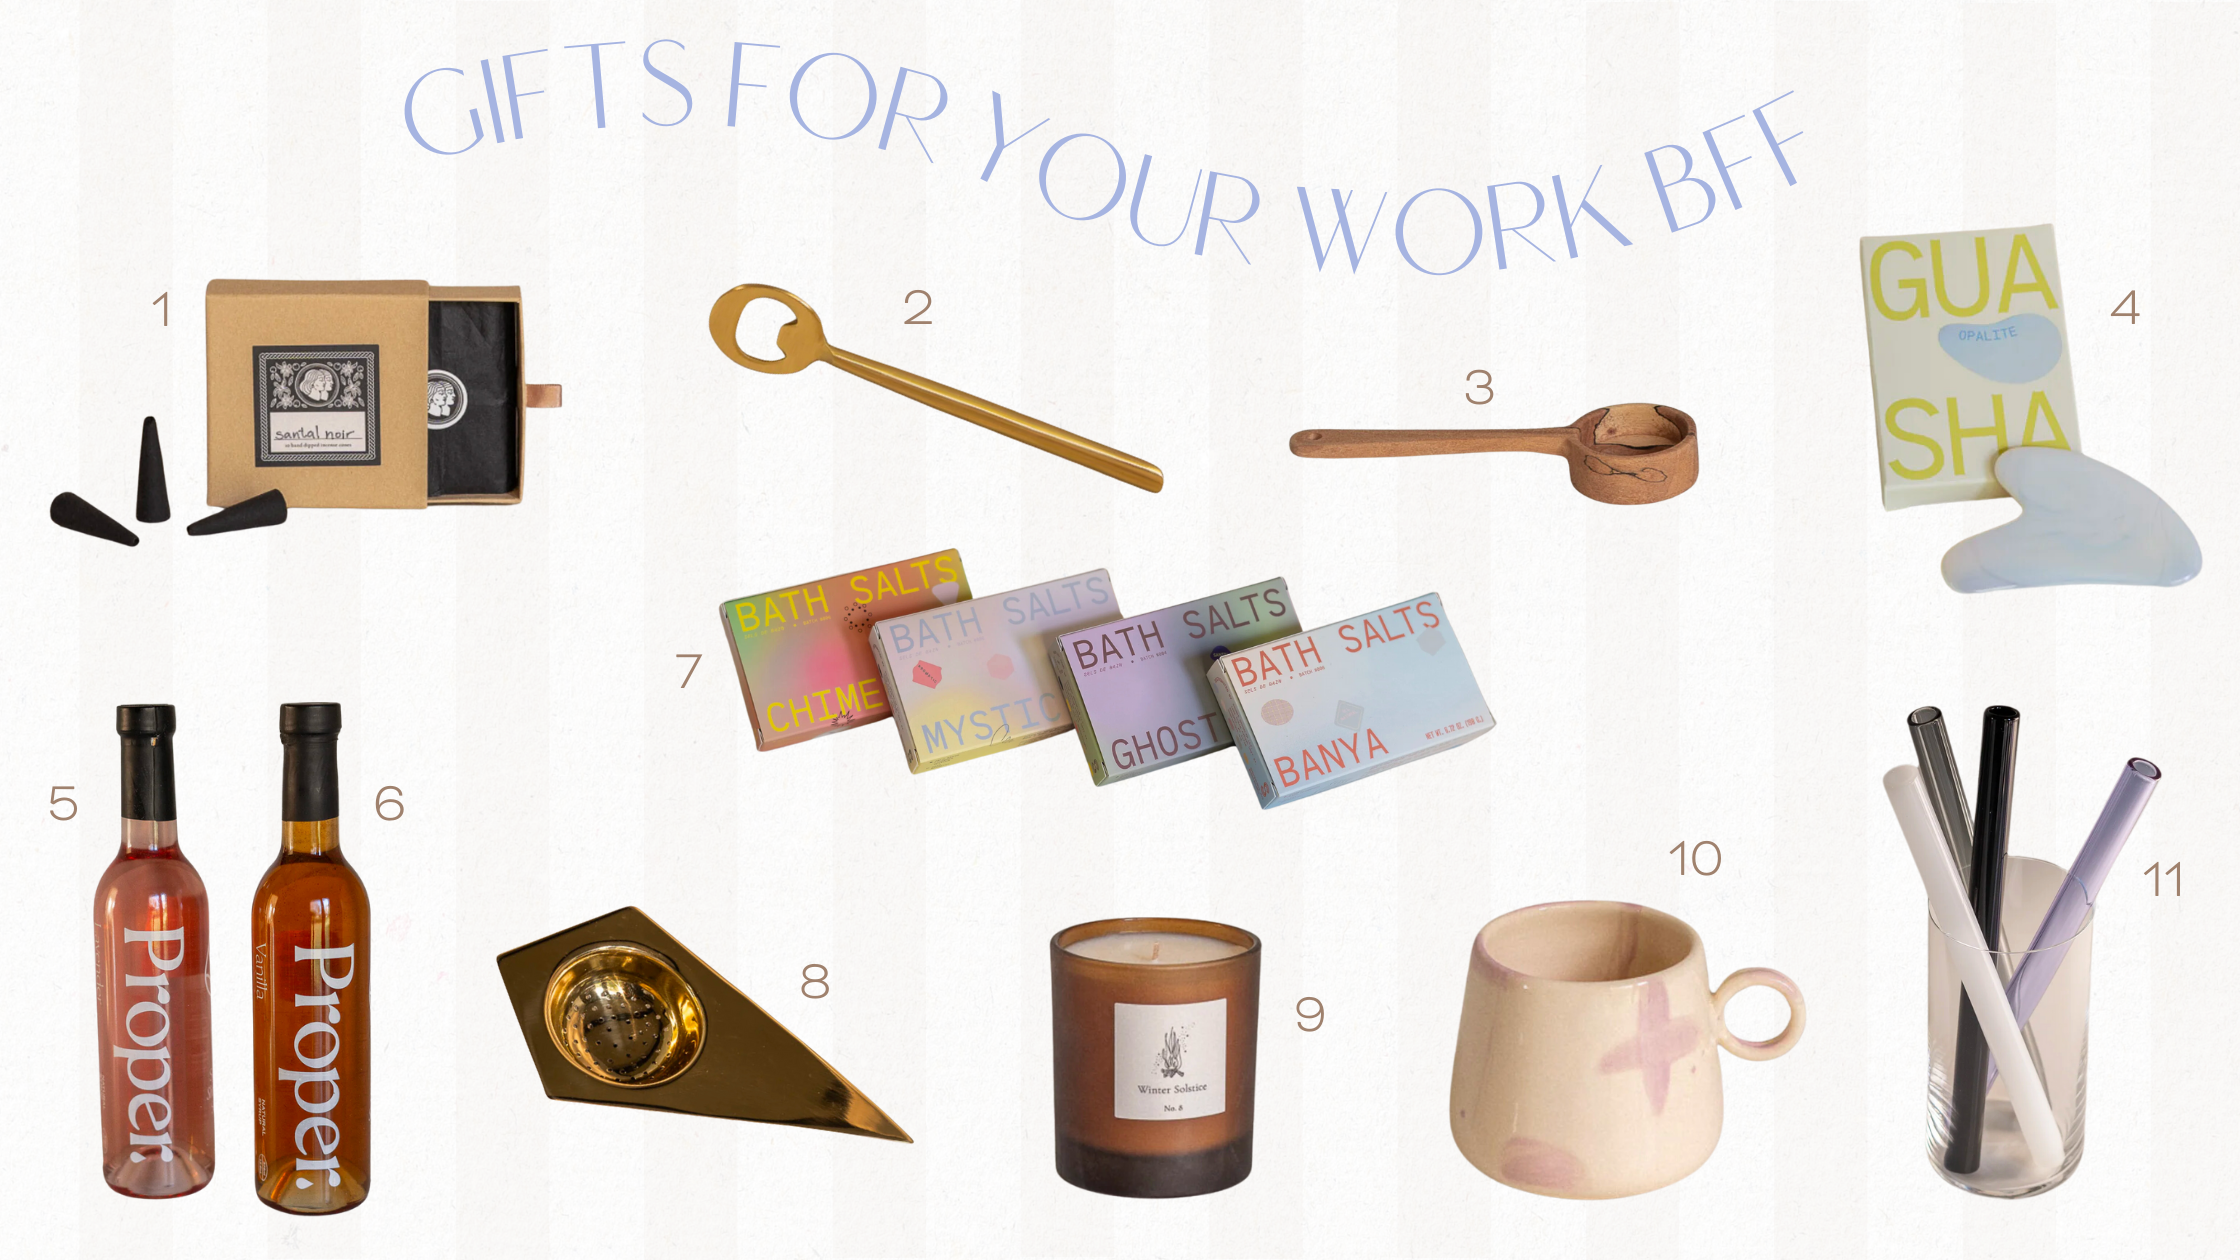 Holiday Gift Guide - Gift Ideas for Your Work BFF